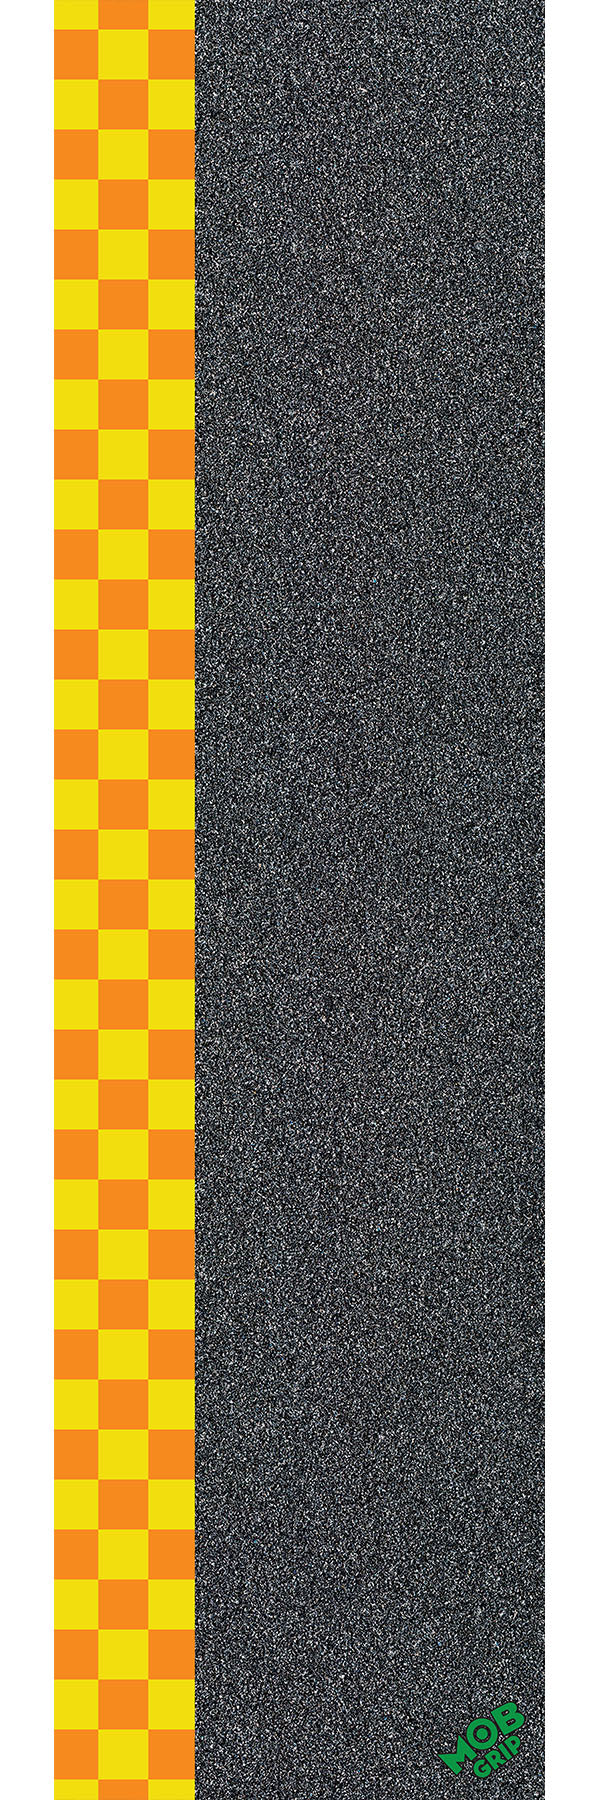 9in x 33in Transparent Yellow Sheet Mob Skateboard Grip Tape